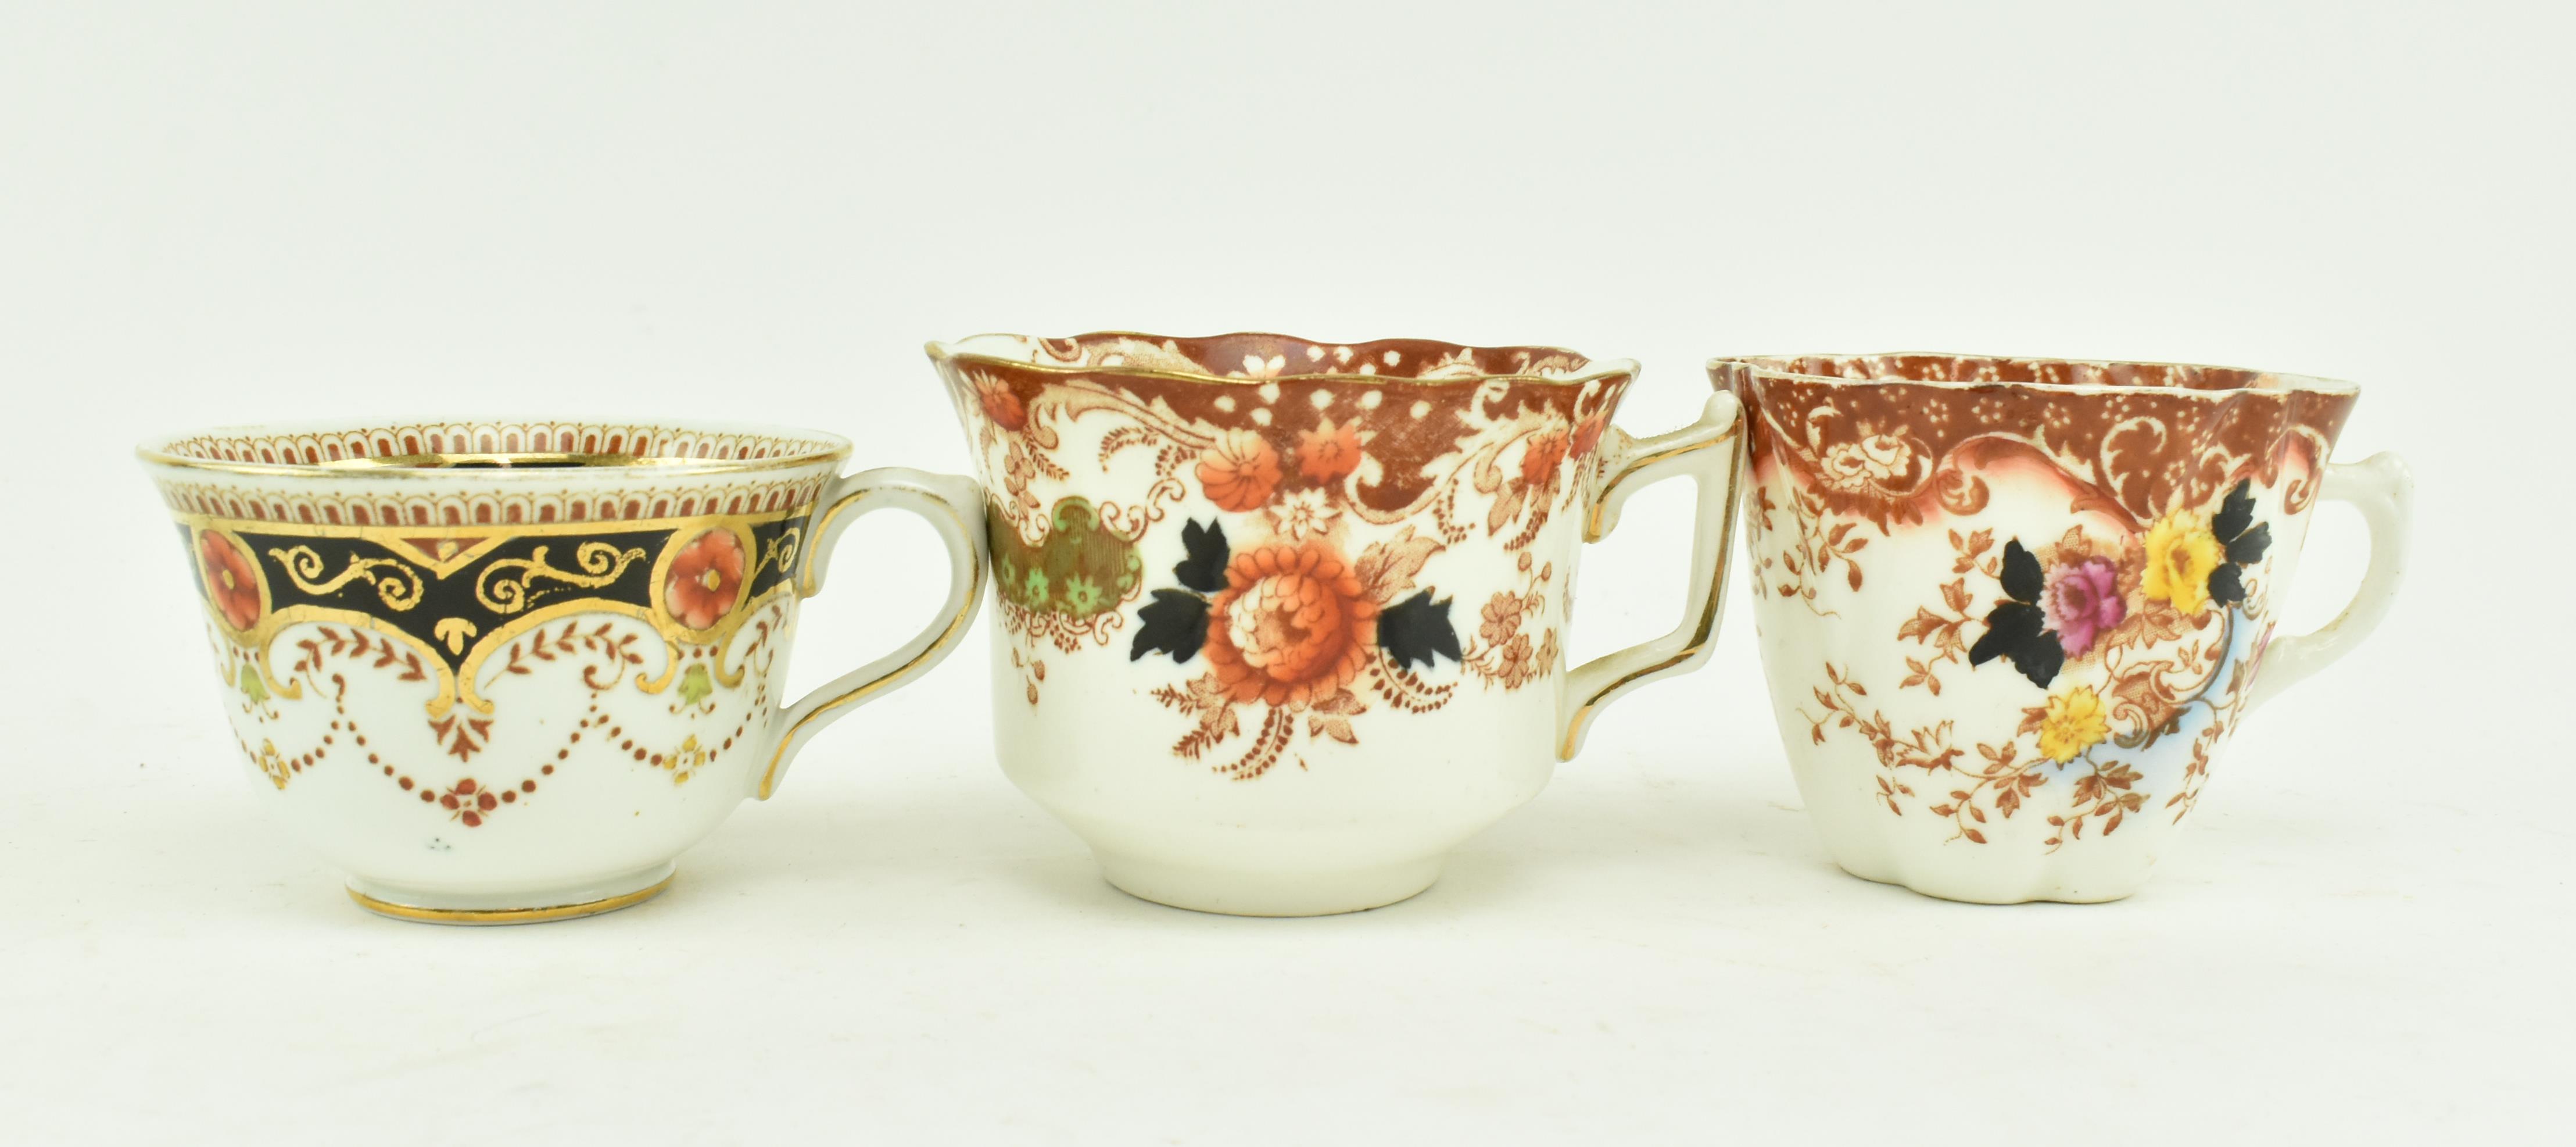 COLLECTION OF 19TH CENTURY PORCELAIN TEACUPS & SAUCERS - Image 10 of 13